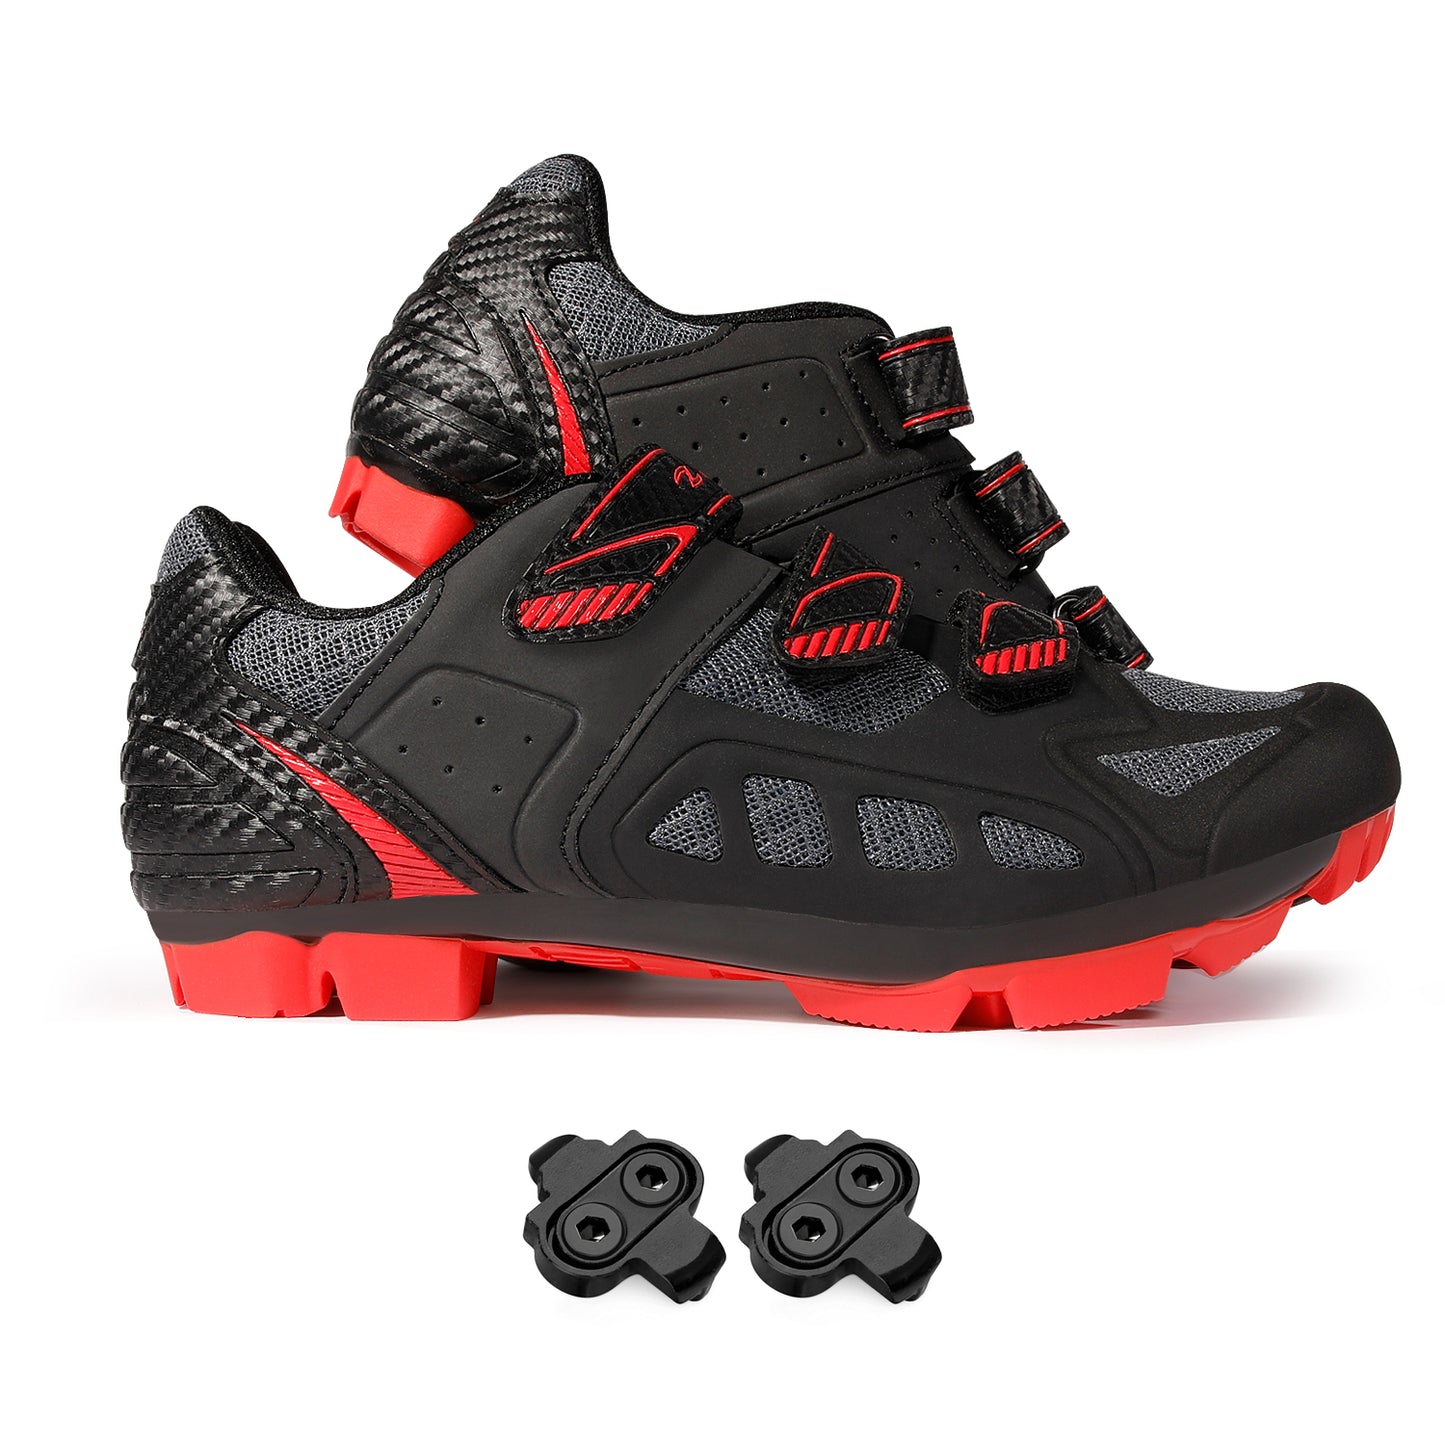 Zol Predator Mtb Mountain Bike and Indoor Cycling Shoes with Cleats